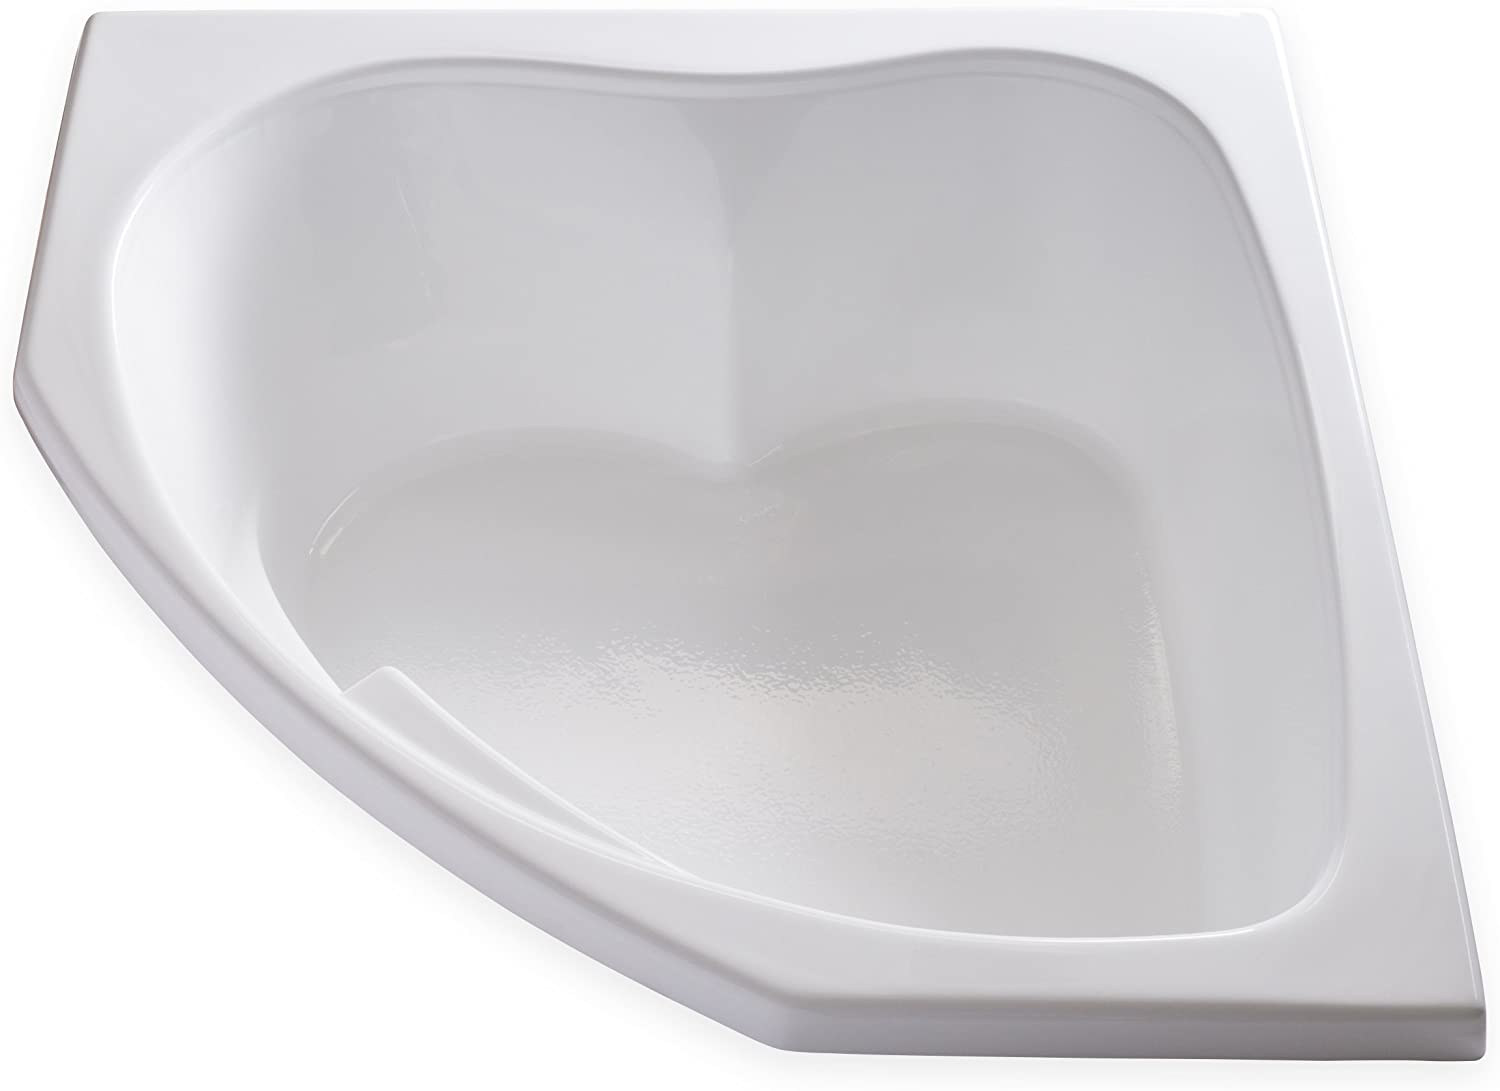 Carver Tubs Drop-In Corner Two-Person Soaking Tub